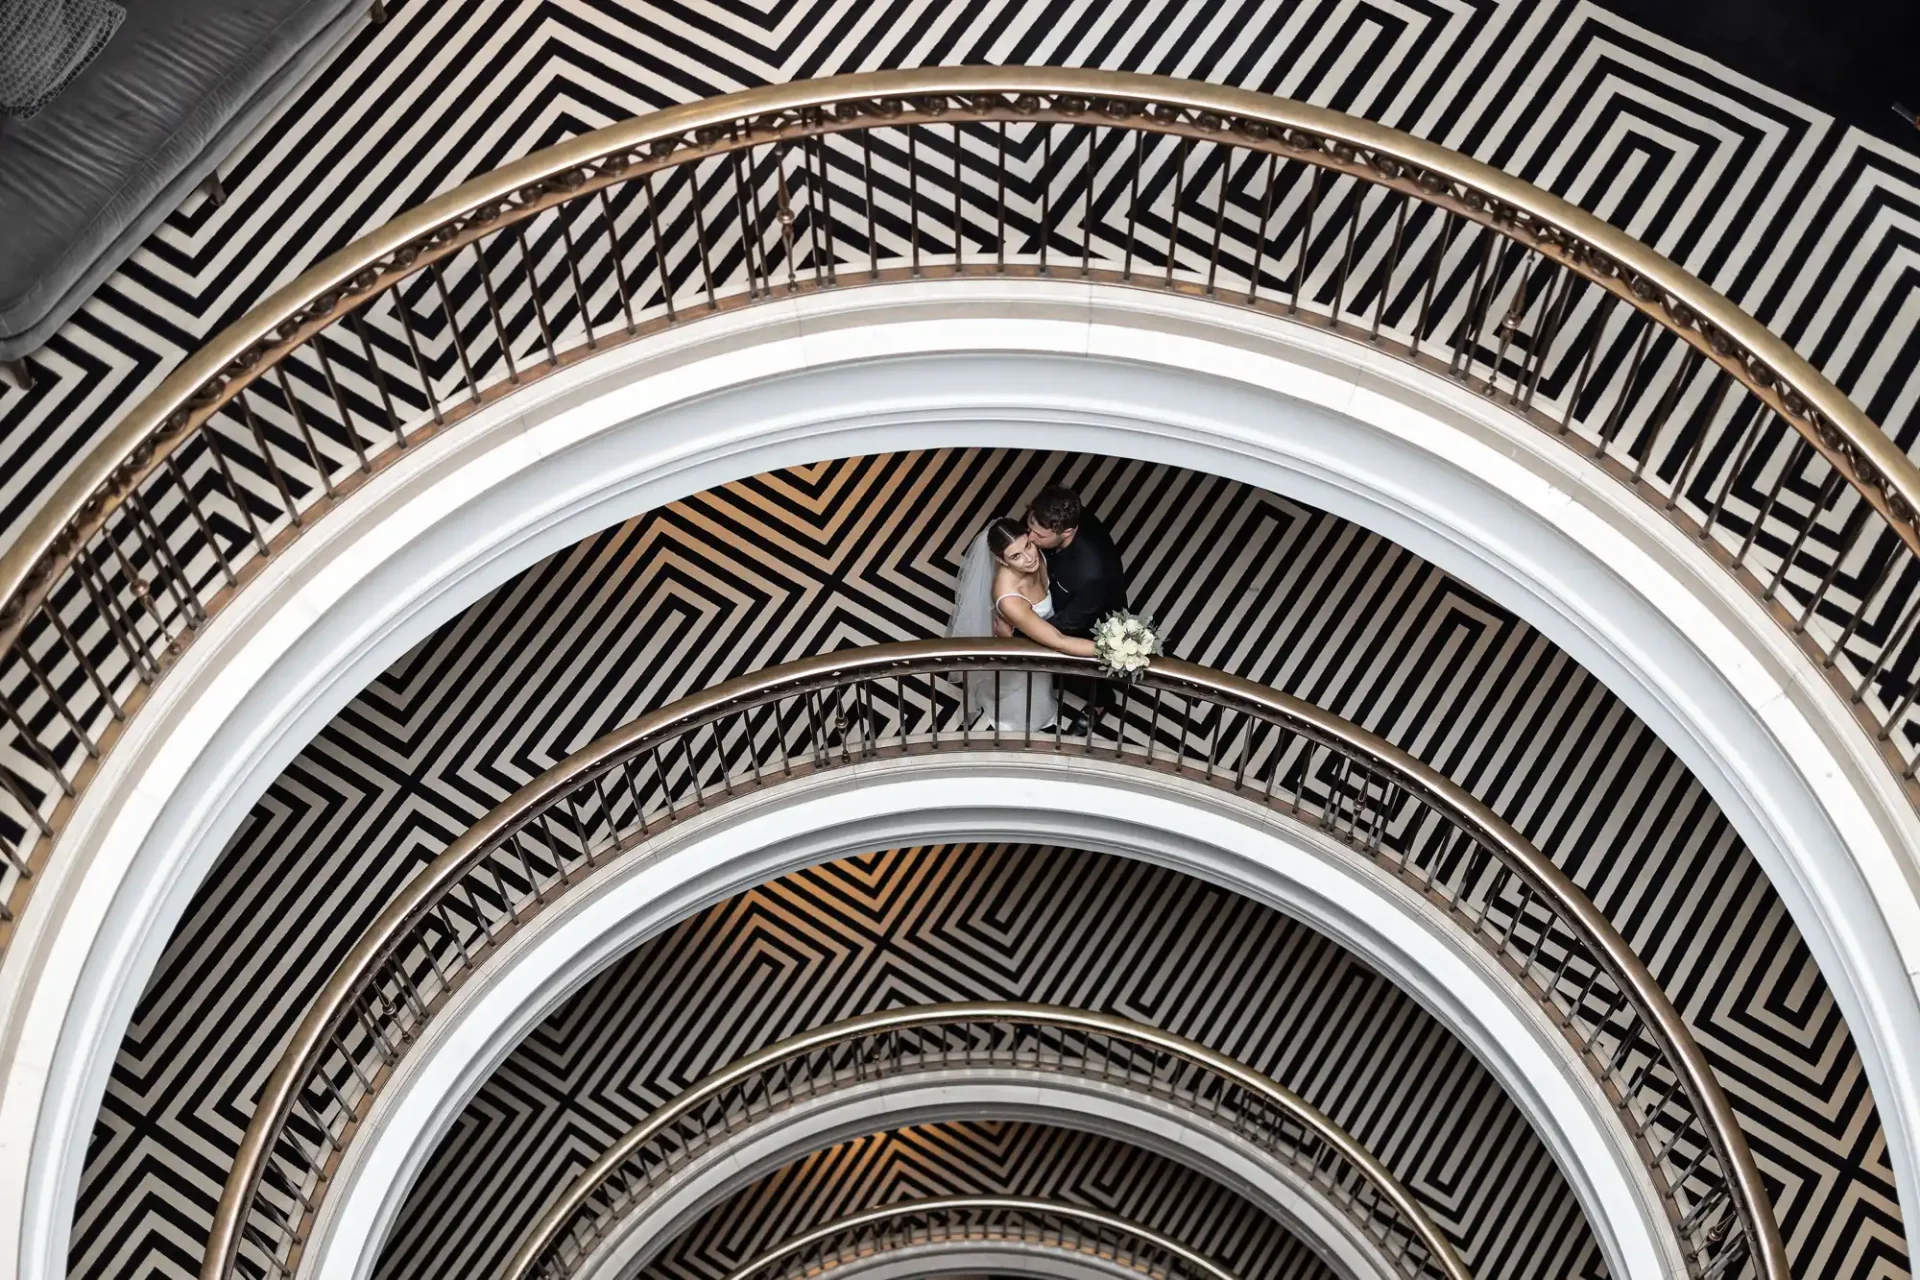 A bride and groom embrace on a balcony with geometric black and white patterns on the floors of a spiraling staircase.